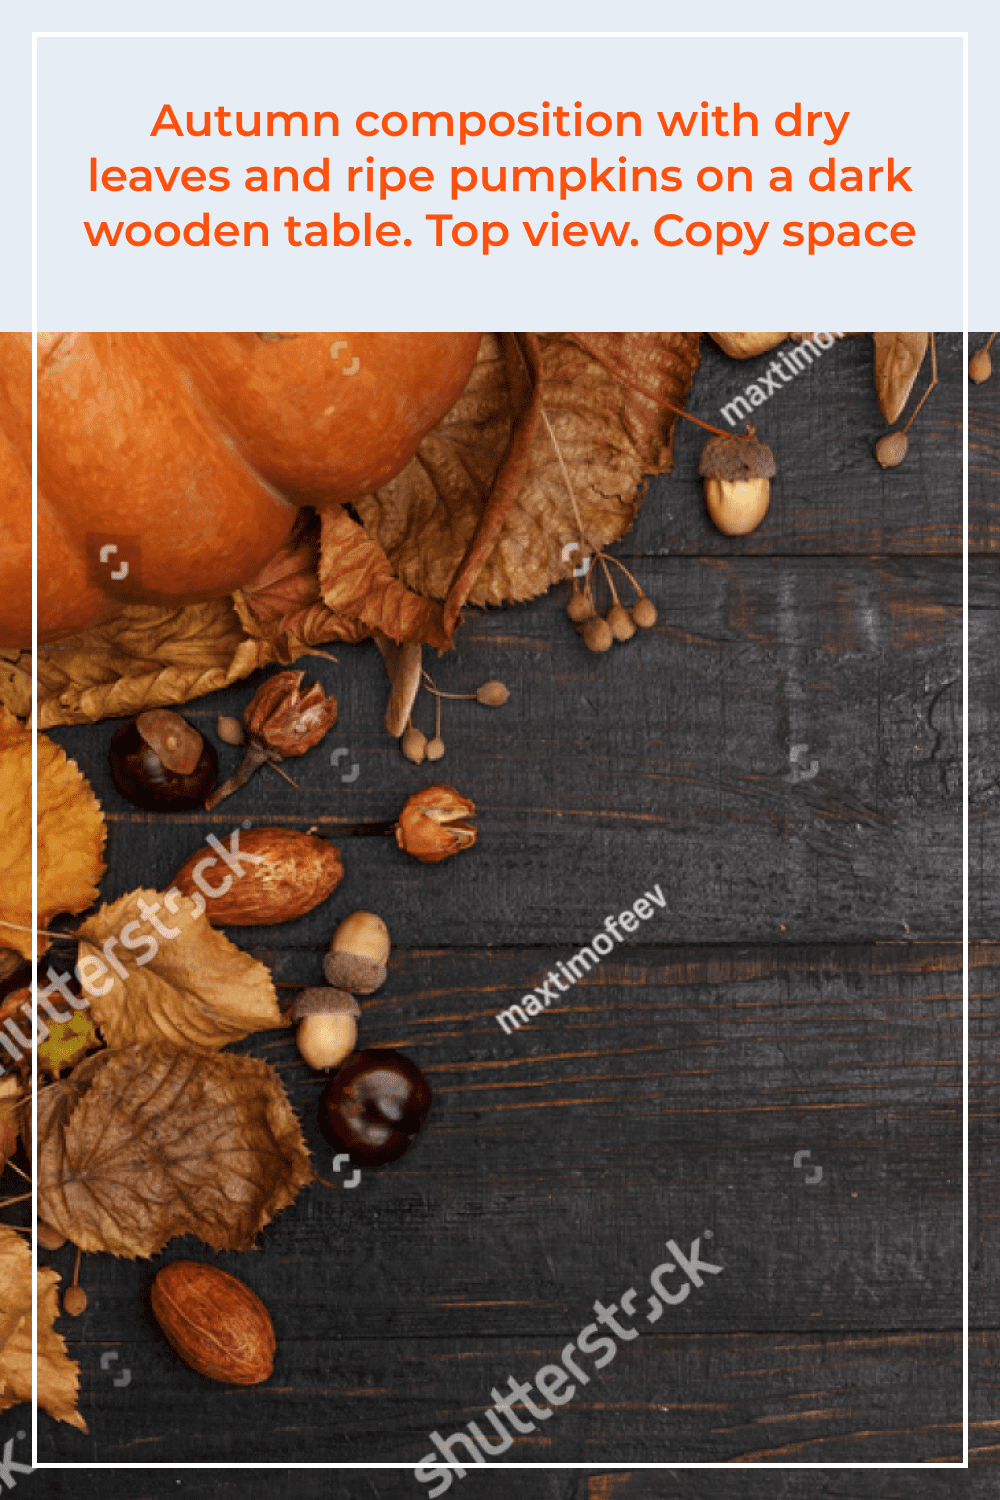 Autumn composition with dry leaves and ripe pumpkins on a dark wooden table..